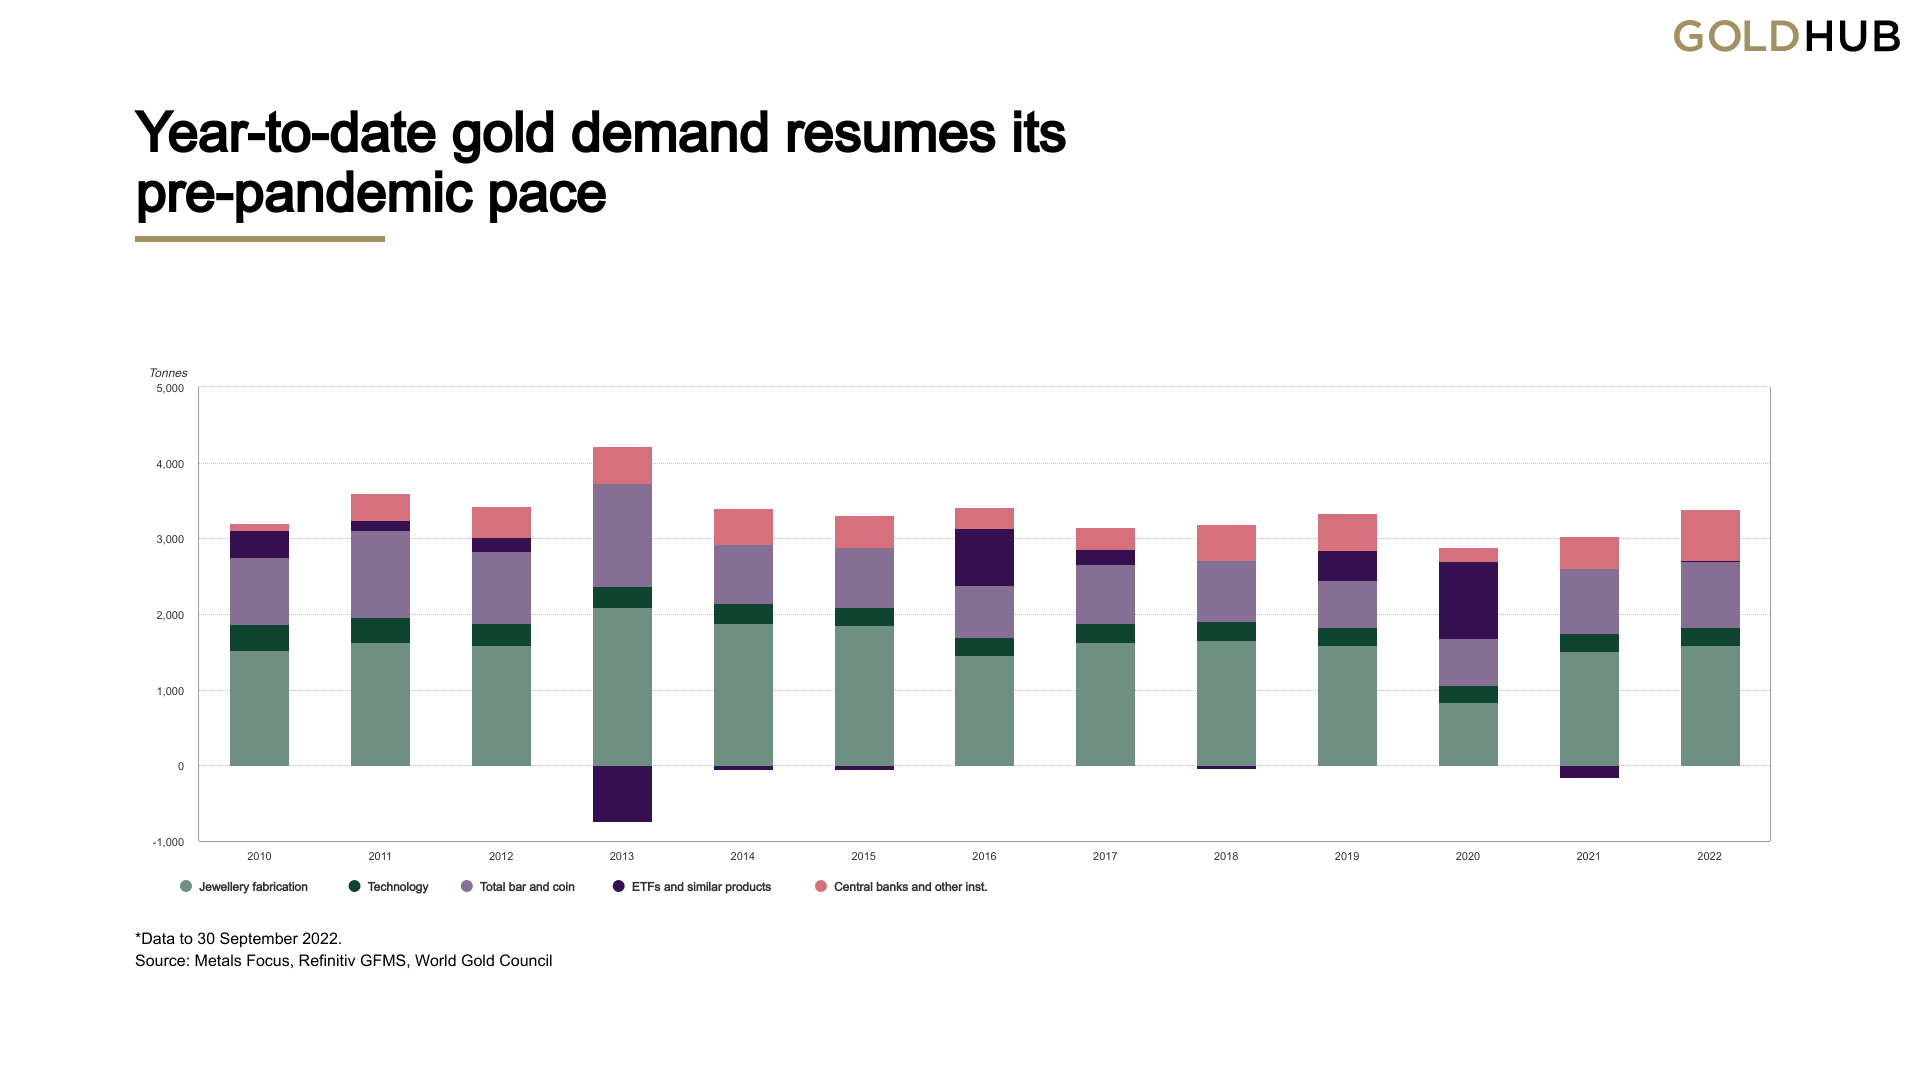 Central Bank Gold Buys This Year Reach an All-Time Quarterly High in Q3, 400 Tons Purchased Is the 'Most on Record’